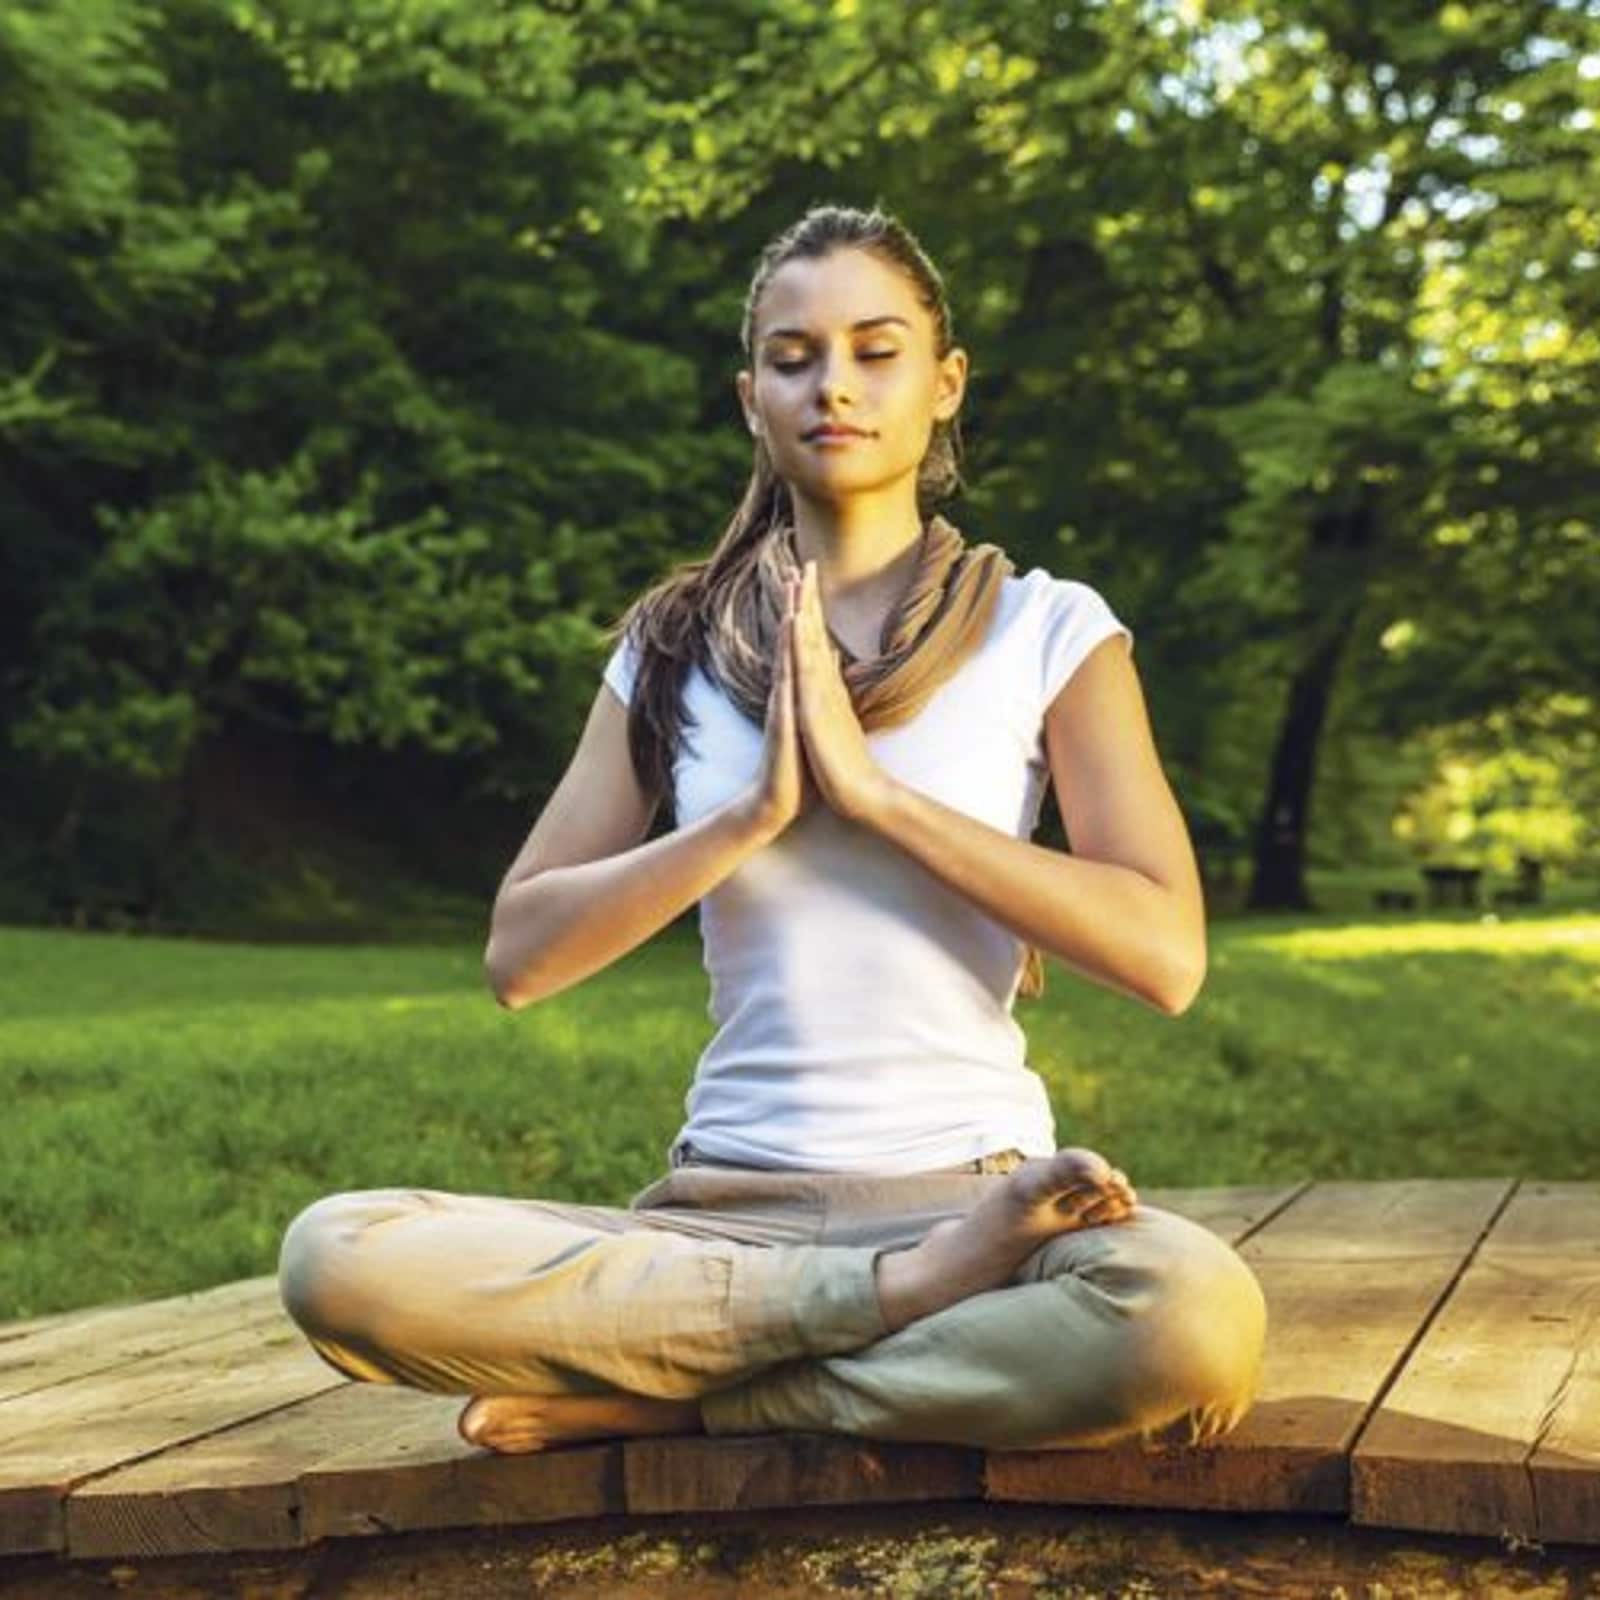 Morning meditation is crucial for relieving anxiety in the morning.